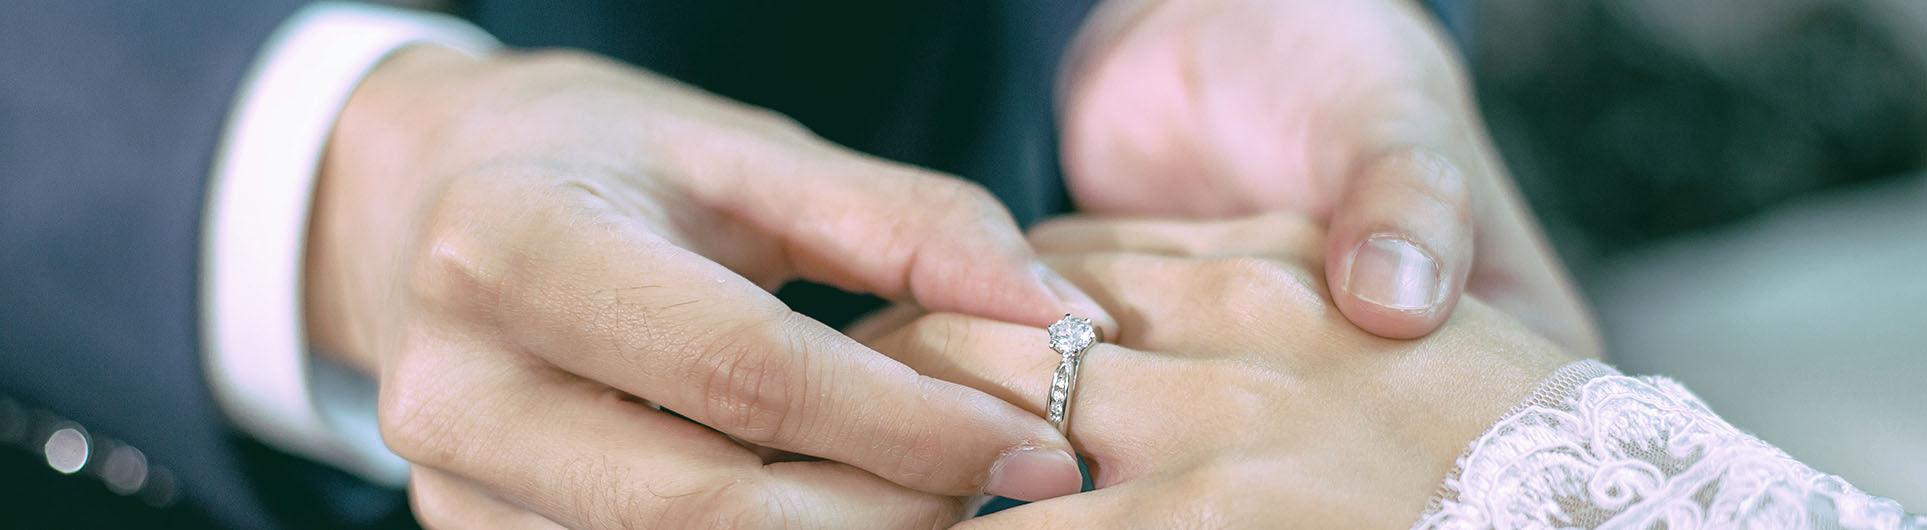 A DIAMOND ENGAGEMENT RING – A BEAUTIFUL SURPRISE THAT SAYS "PLEASE MARRY ME" - Monroe Yorke Diamonds